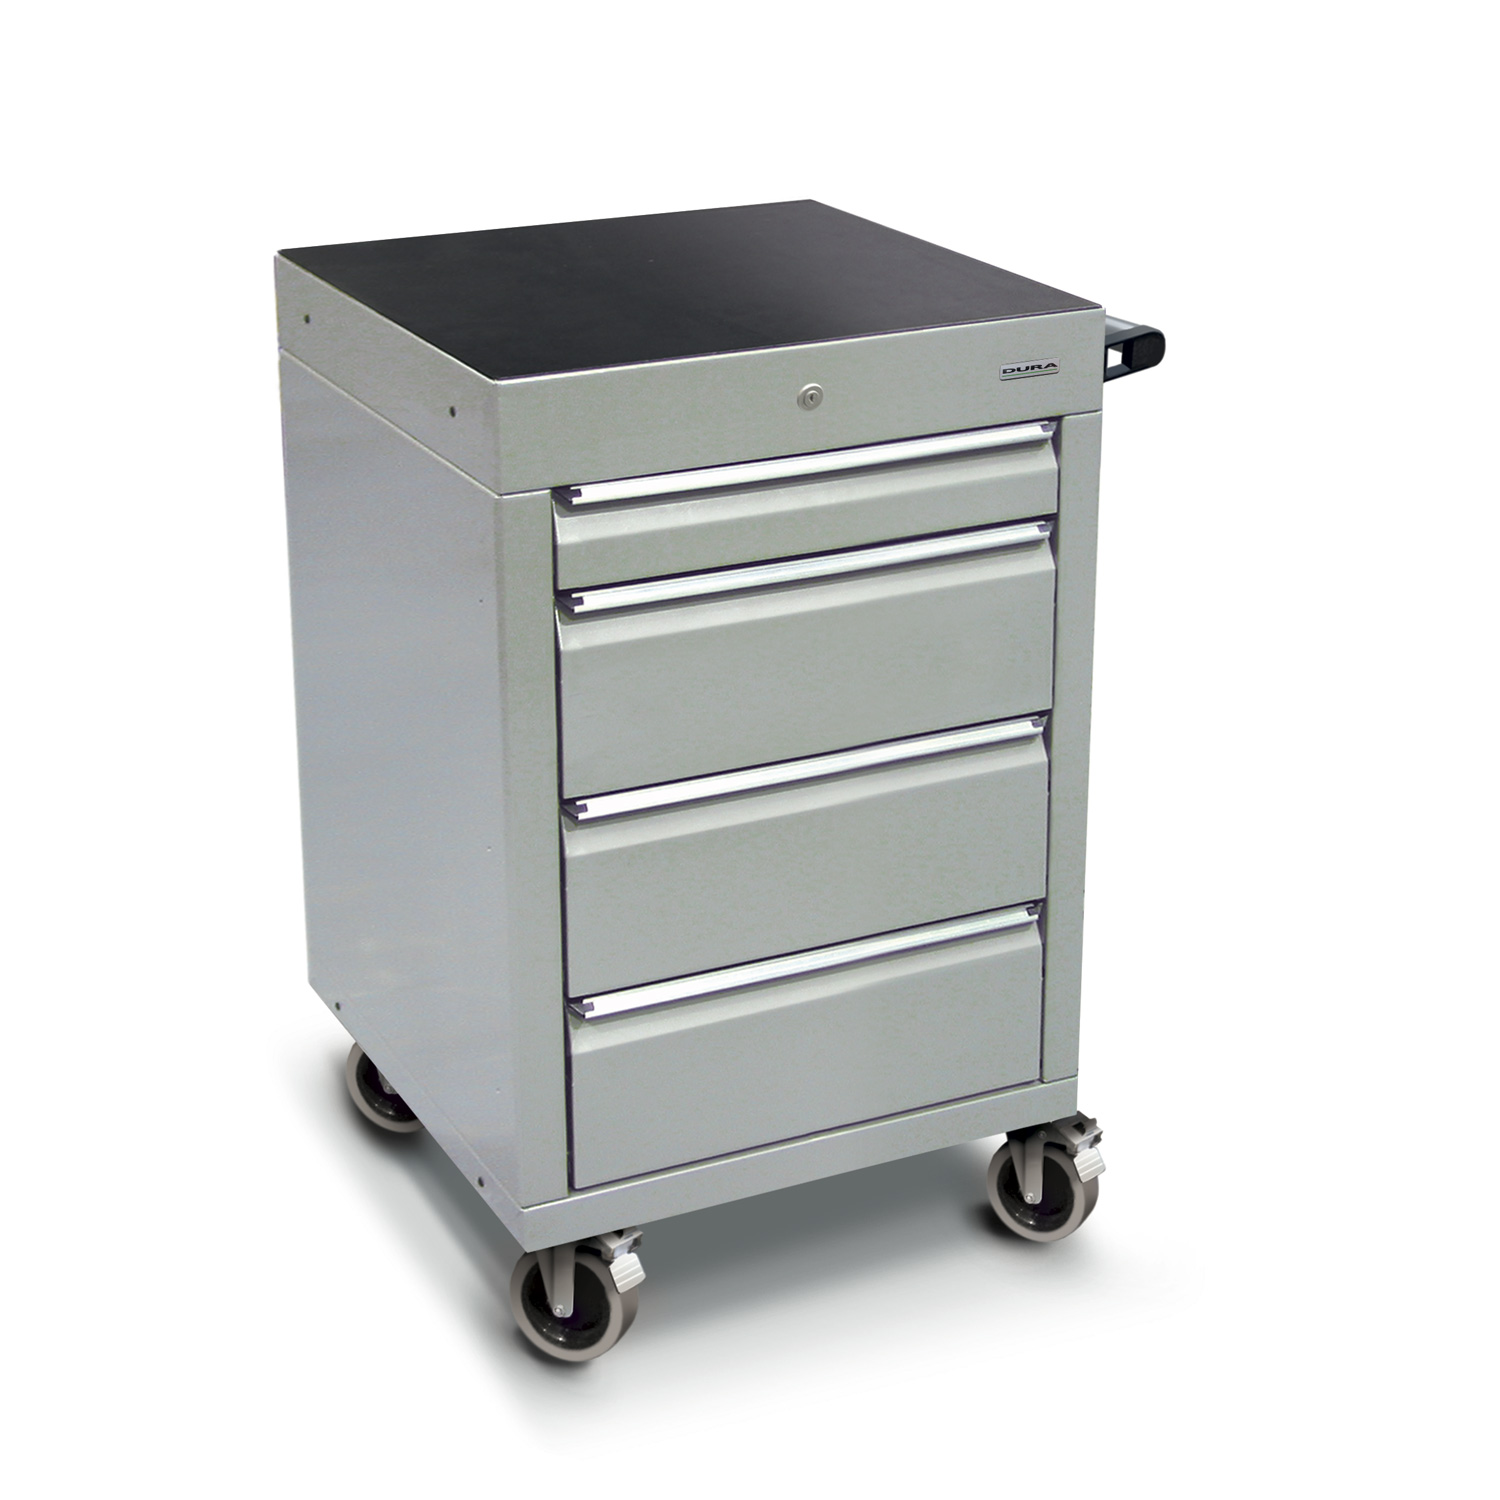 600 series cabinet with 4 drawers (1 medium, 3 large) and castors